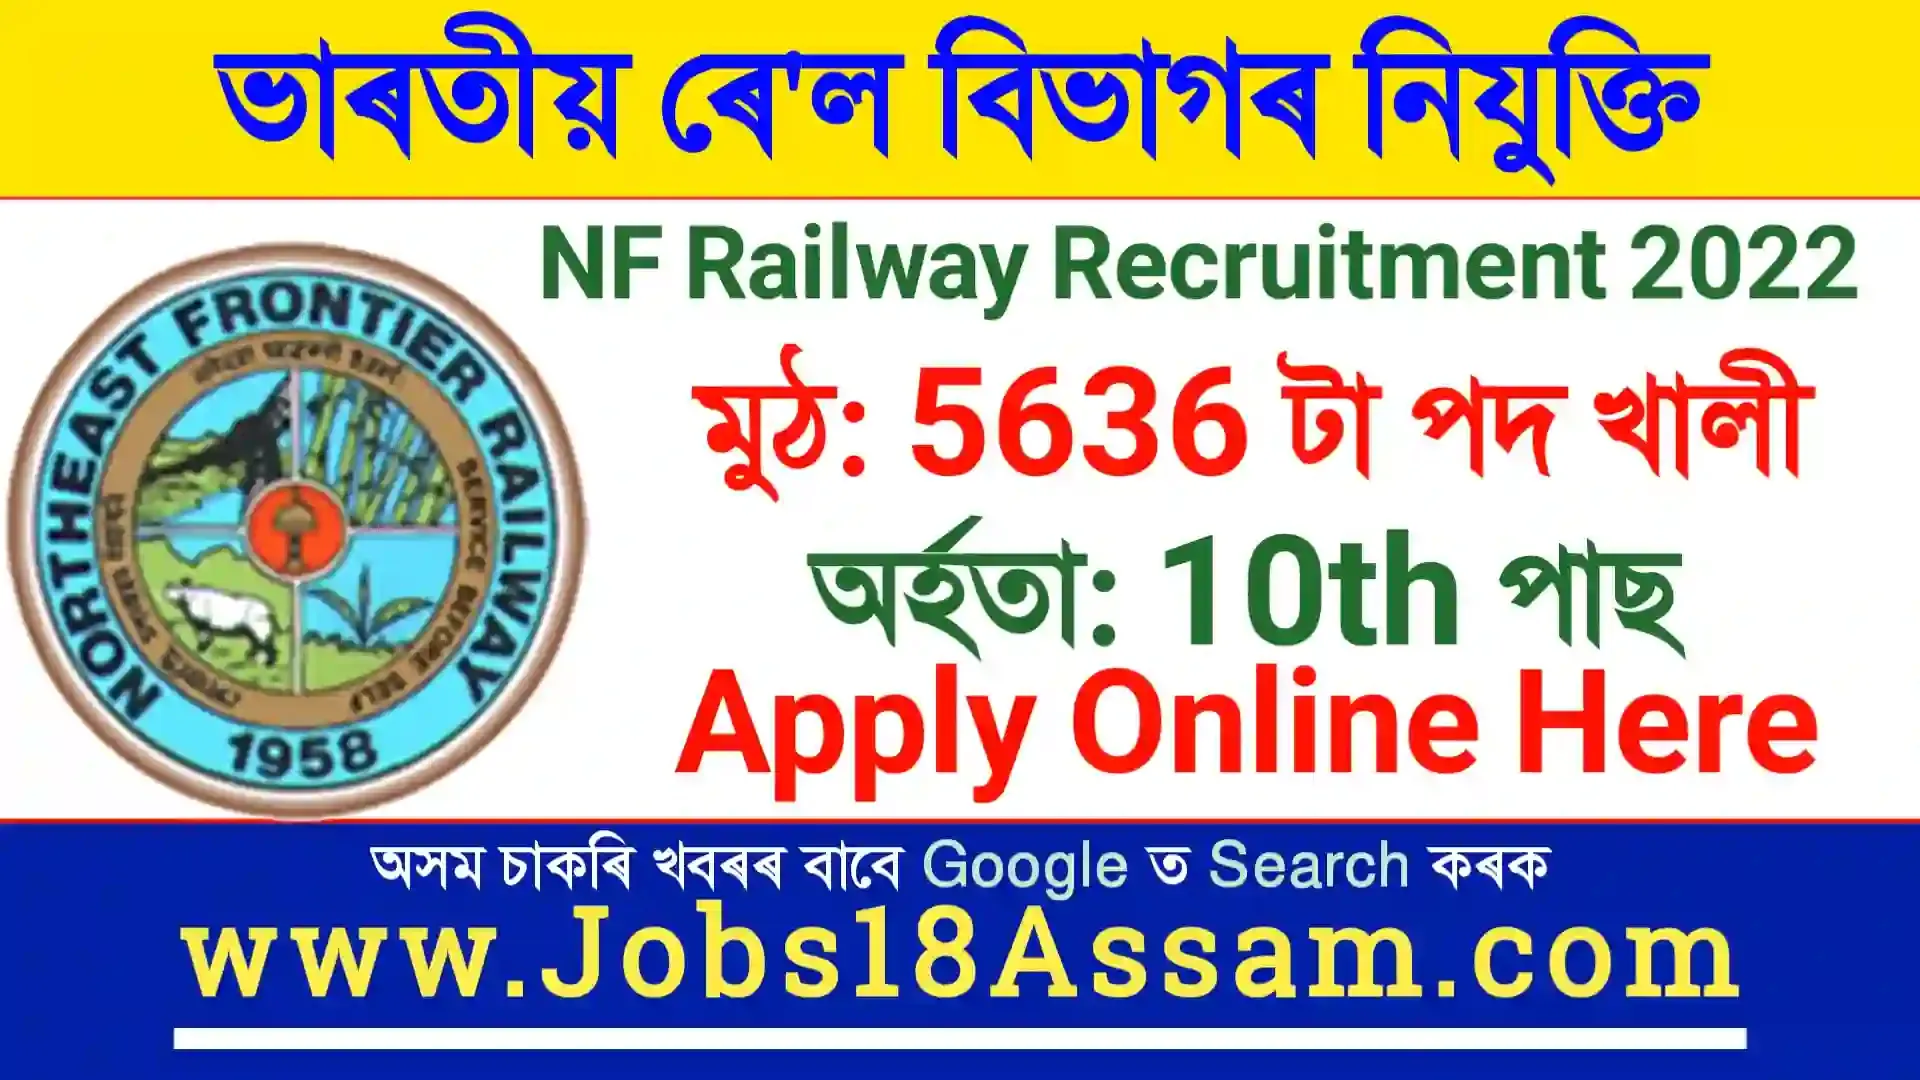 NF Railway Apprentice Recruitment 2022 - Apply Online for 5636 Vacancy | Candidates can Apply from 10th Standard